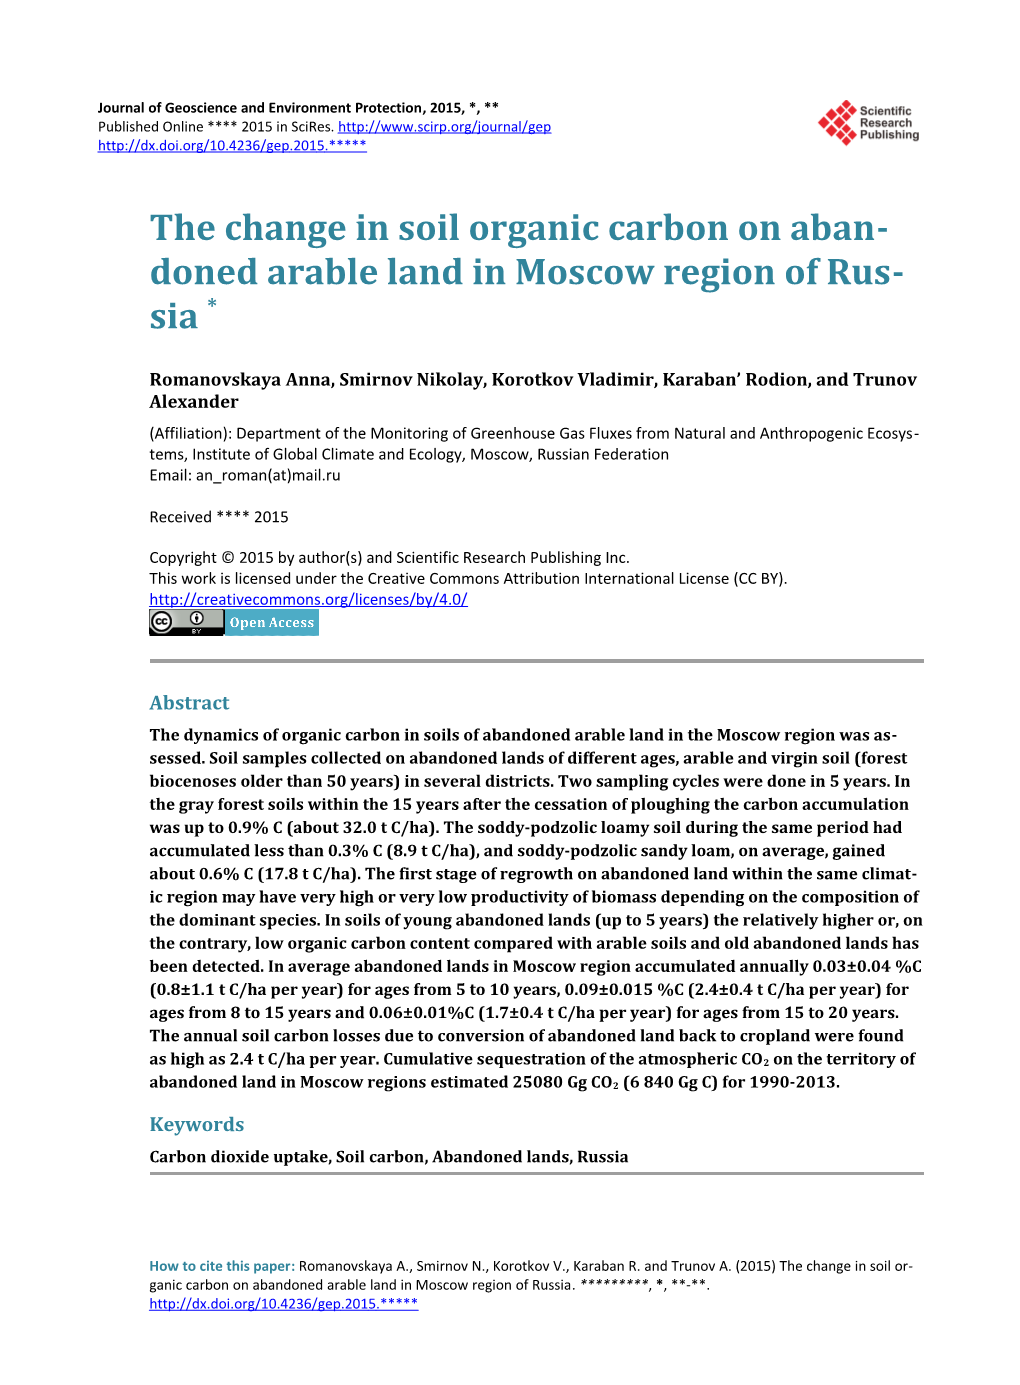 The Change in Soil Organic Carbon on Abandoned Arable Land in Moscow Region of Russia *